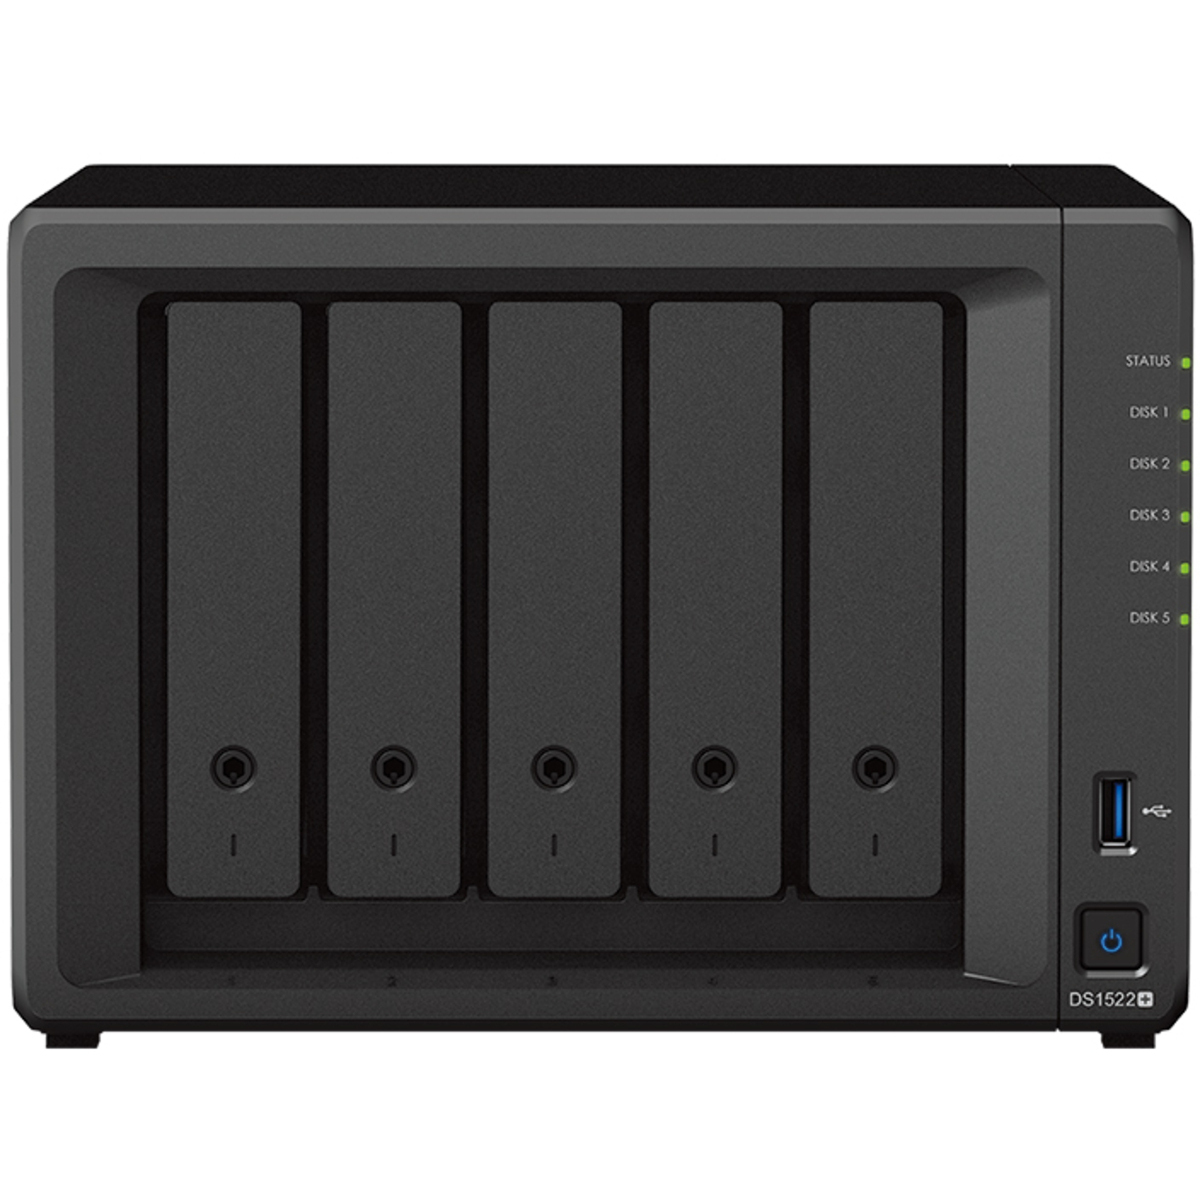 Synology DiskStation DS1522+ 70tb 5-Bay Desktop Multimedia / Power User / Business NAS - Network Attached Storage Device 5x14tb Seagate IronWolf Pro ST14000NT001 3.5 7200rpm SATA 6Gb/s HDD NAS Class Drives Installed - Burn-In Tested - ON SALE DiskStation DS1522+